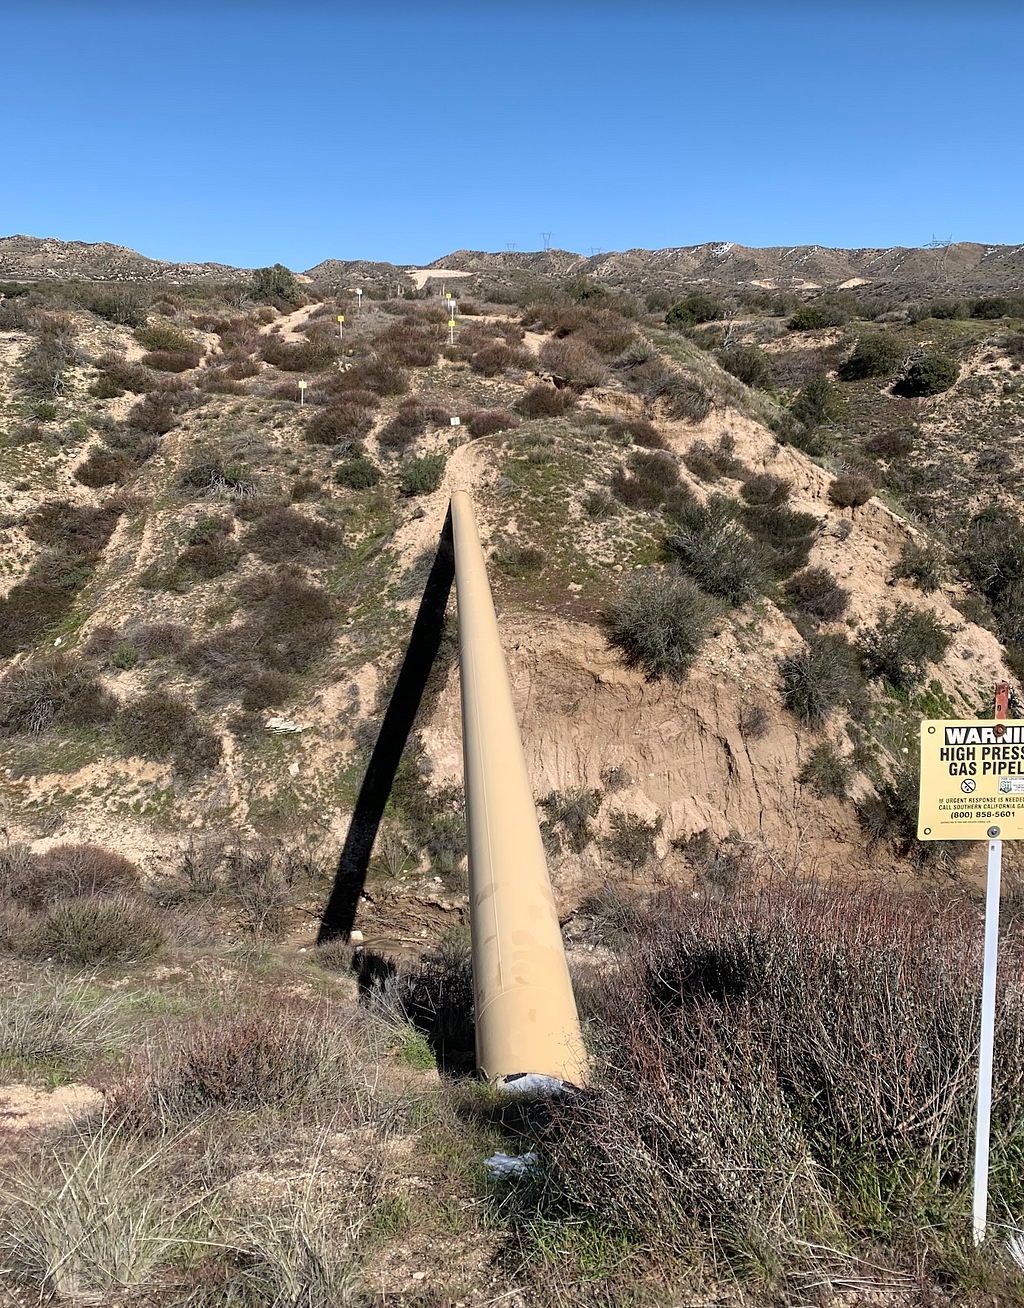 Round sand-colored gas pipeline stretching across a small ravine